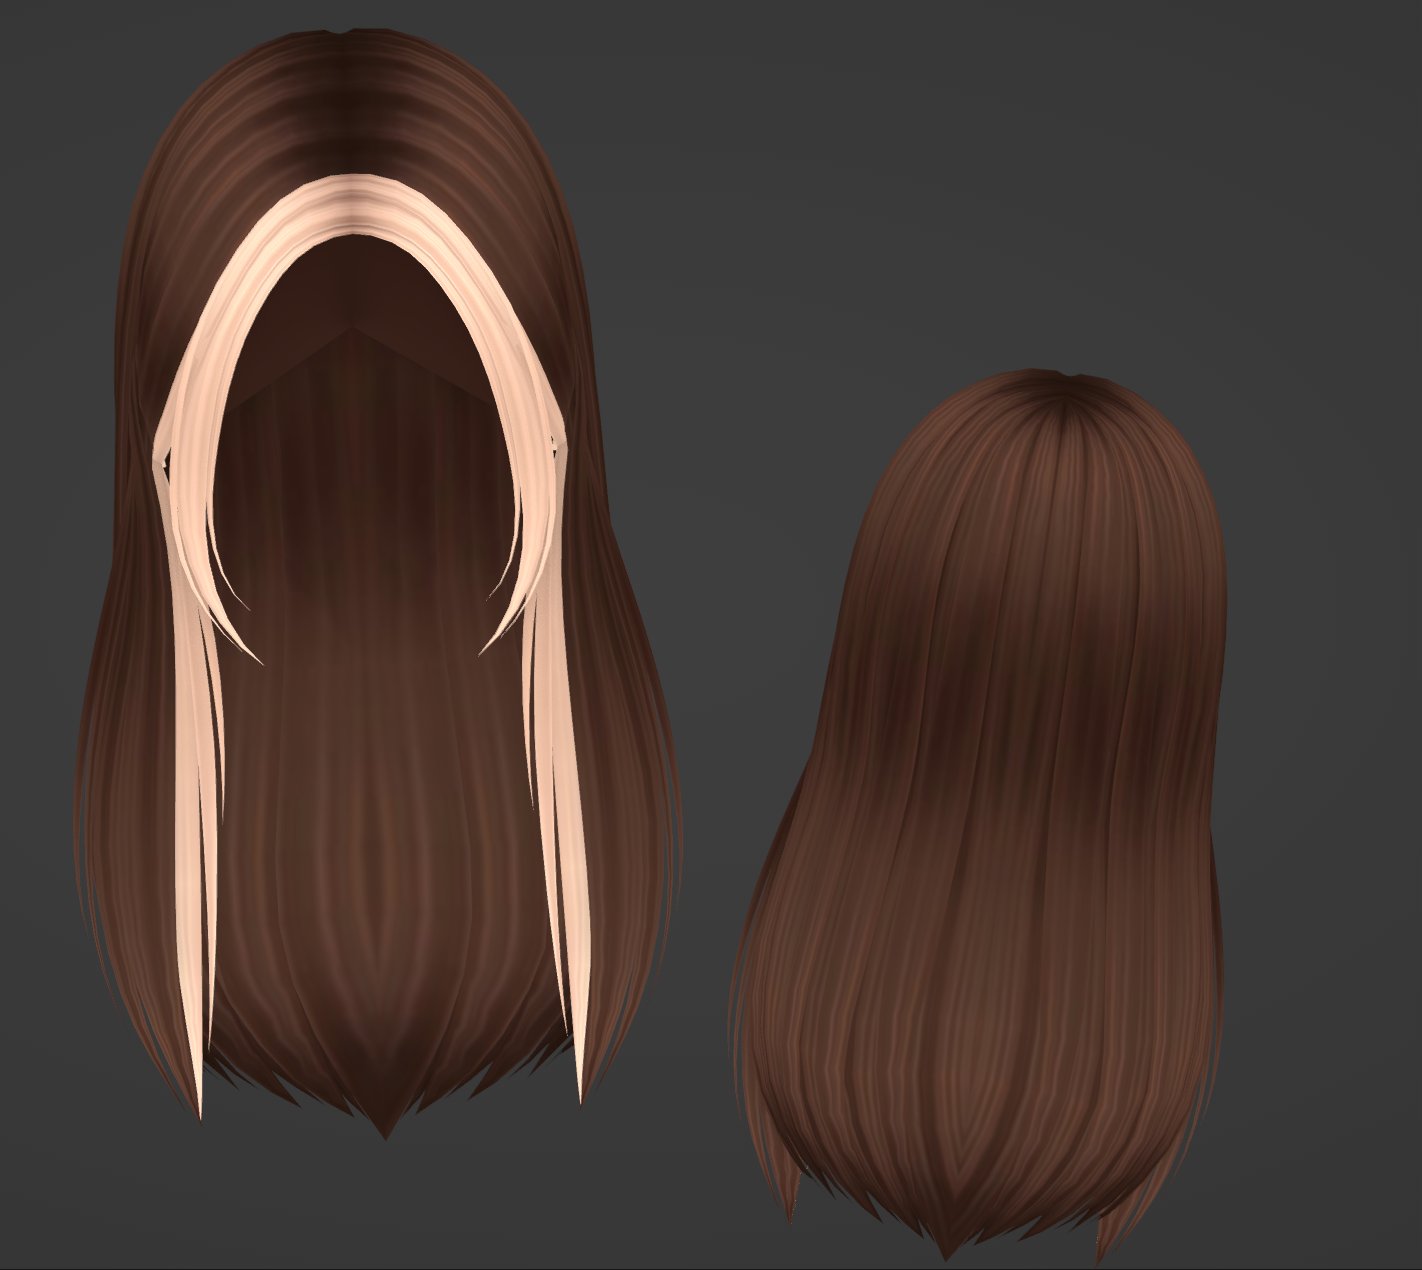 DeleteFalcon on X: Two more FREE Roblox hair UGC limited items that will  be released very soon! Credit - @LeaksEvents  / X